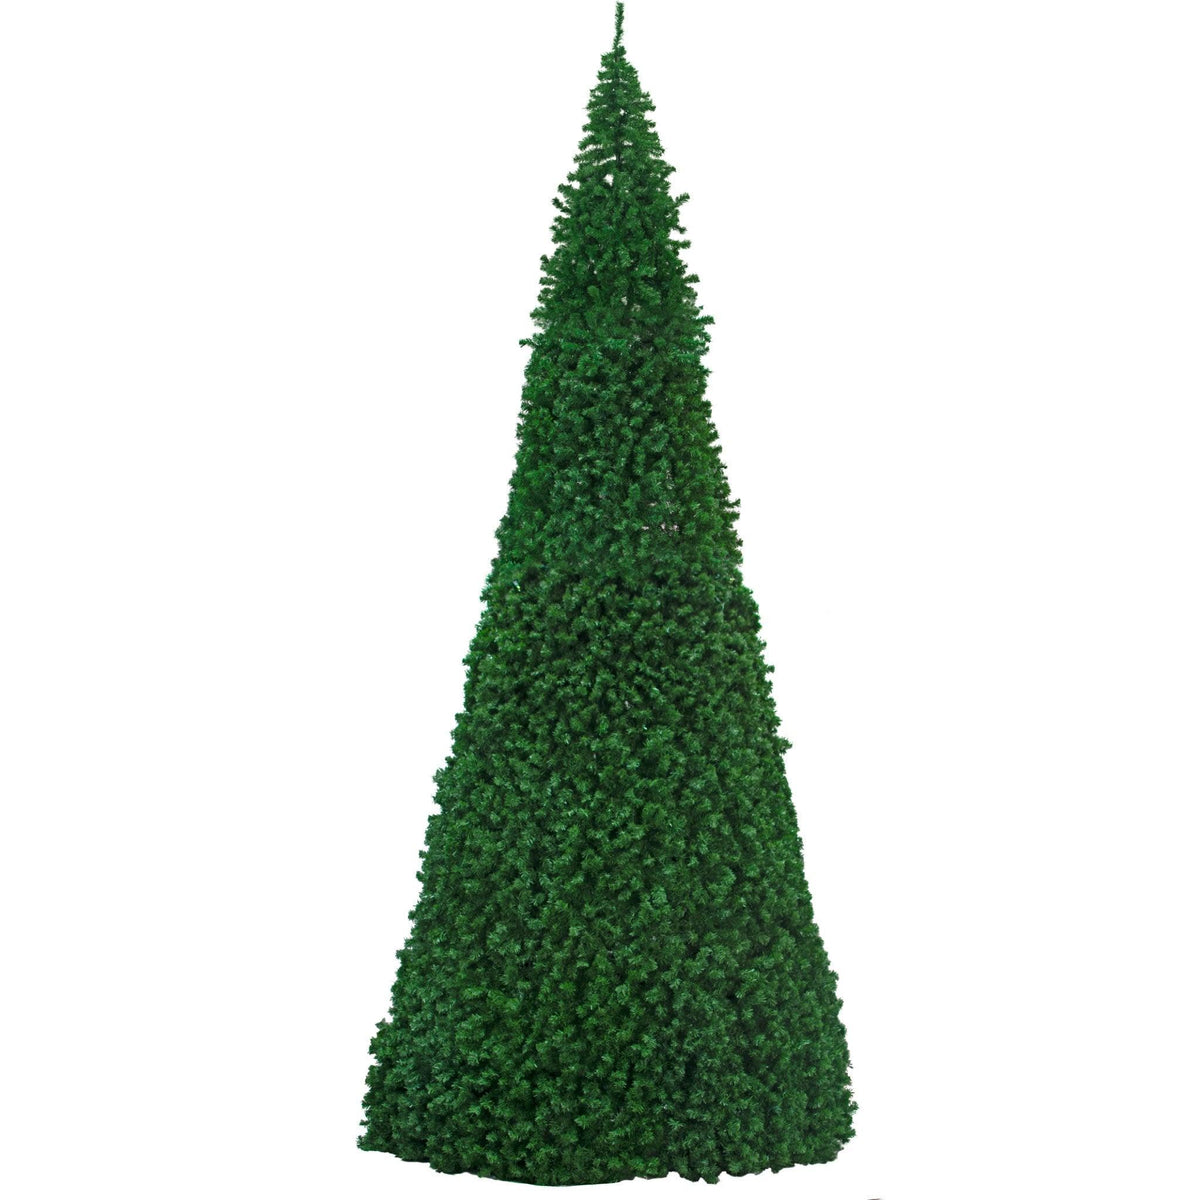 Lee Display's 16FT Commercial Artificial PVC Pine Fir Christmas Tree on sale and available for purchase at leedisplay.com